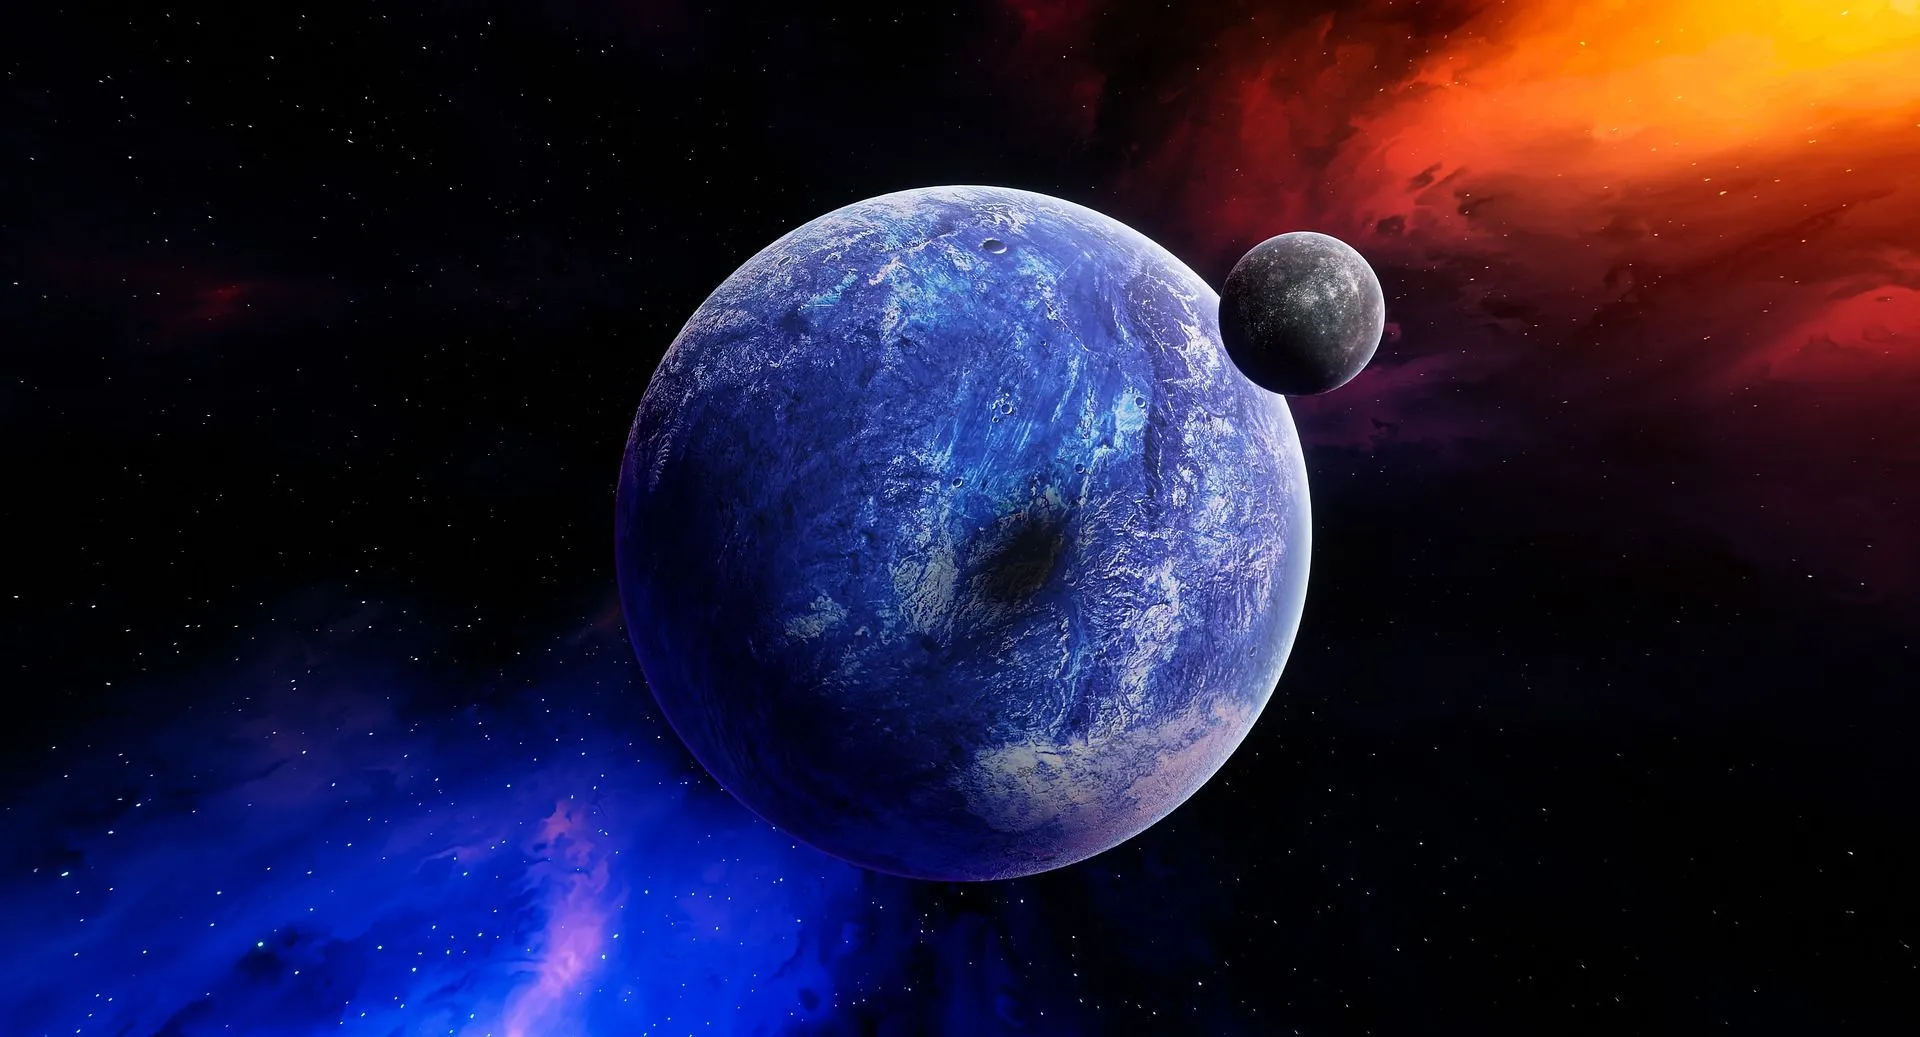 Some exoplanets have a rocky structure with a habitable zone.